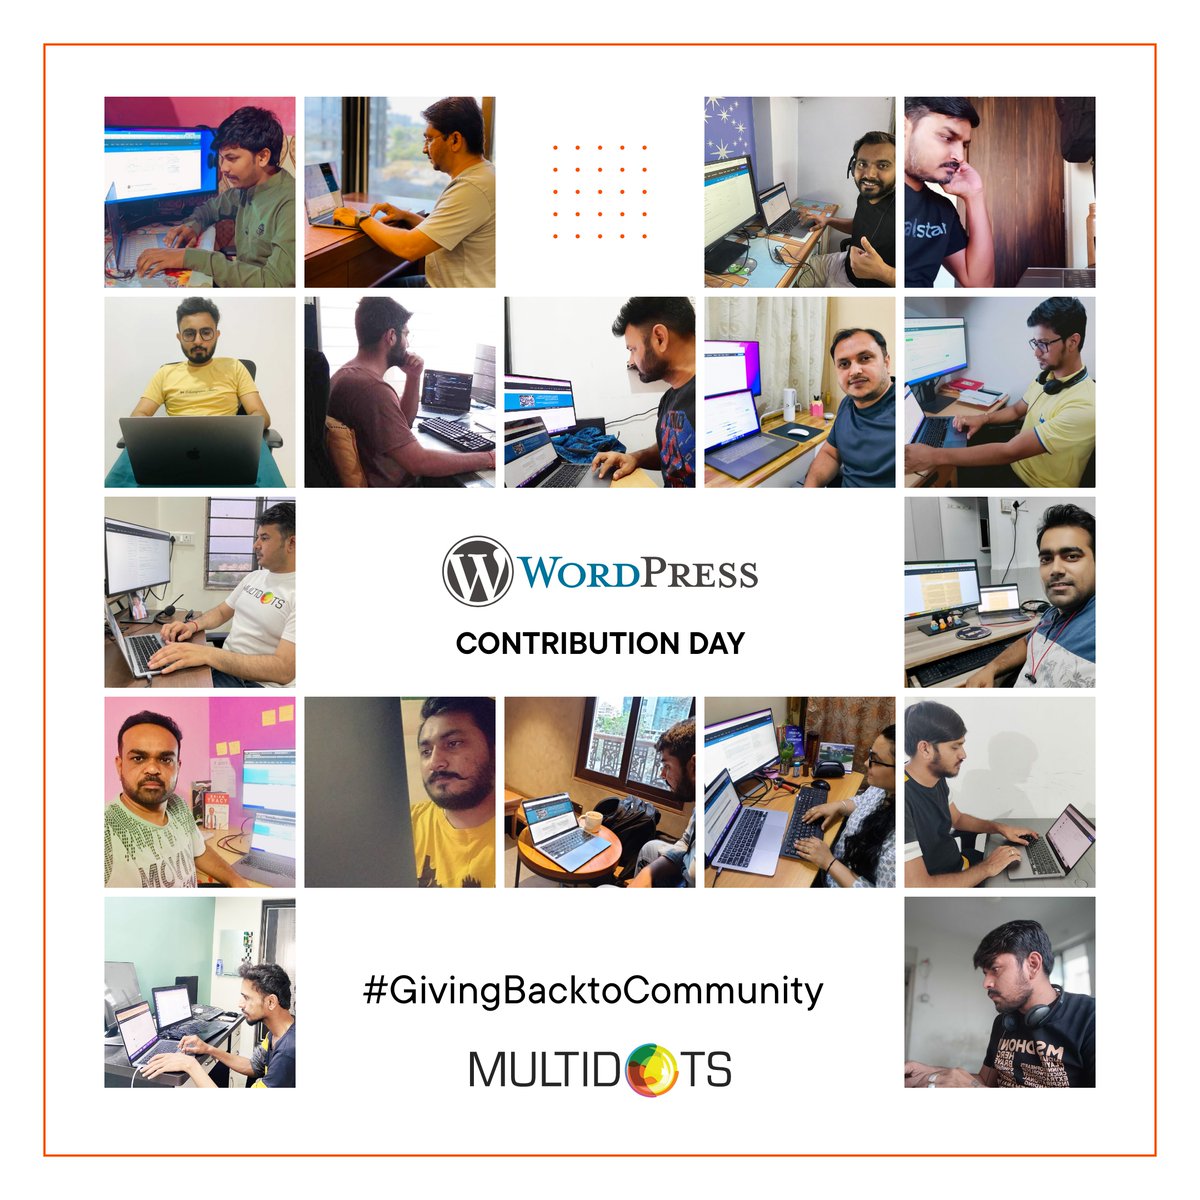 WordPress Contribution Day is in full swing @multidots. Our team contributes through various contribution channels to give back to the community & society with a high spirit. 🙂✨

#WordPressContribution #GivingBacktoCommunity #MDCulture #WordPress